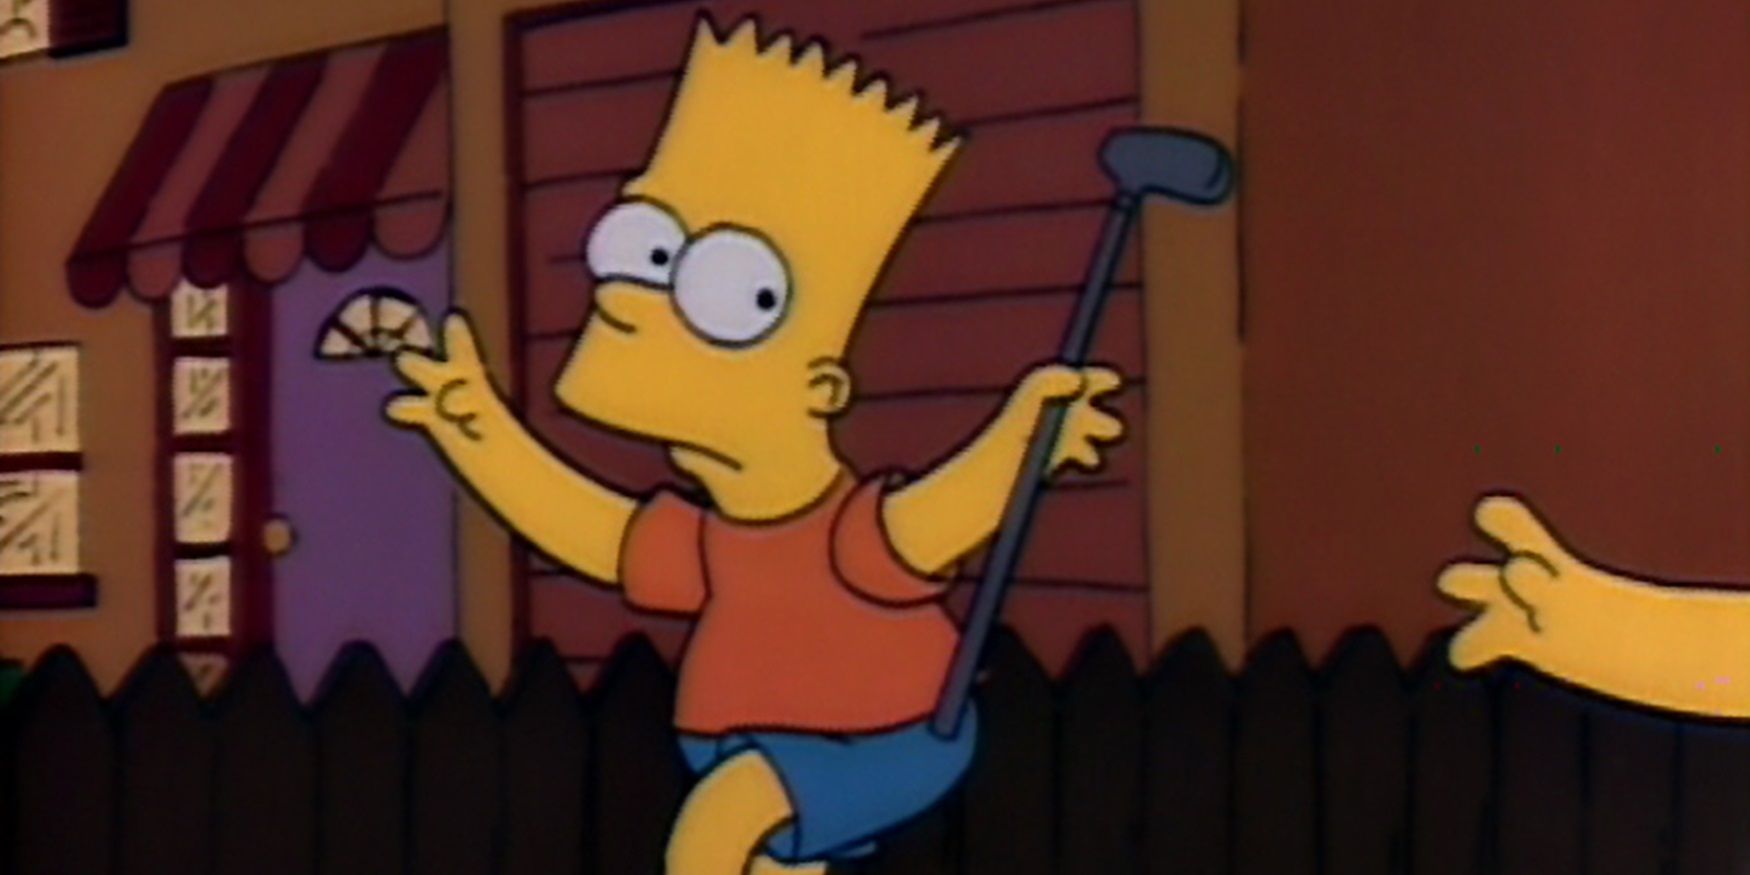 Bart balances with a putter in The Simpsons